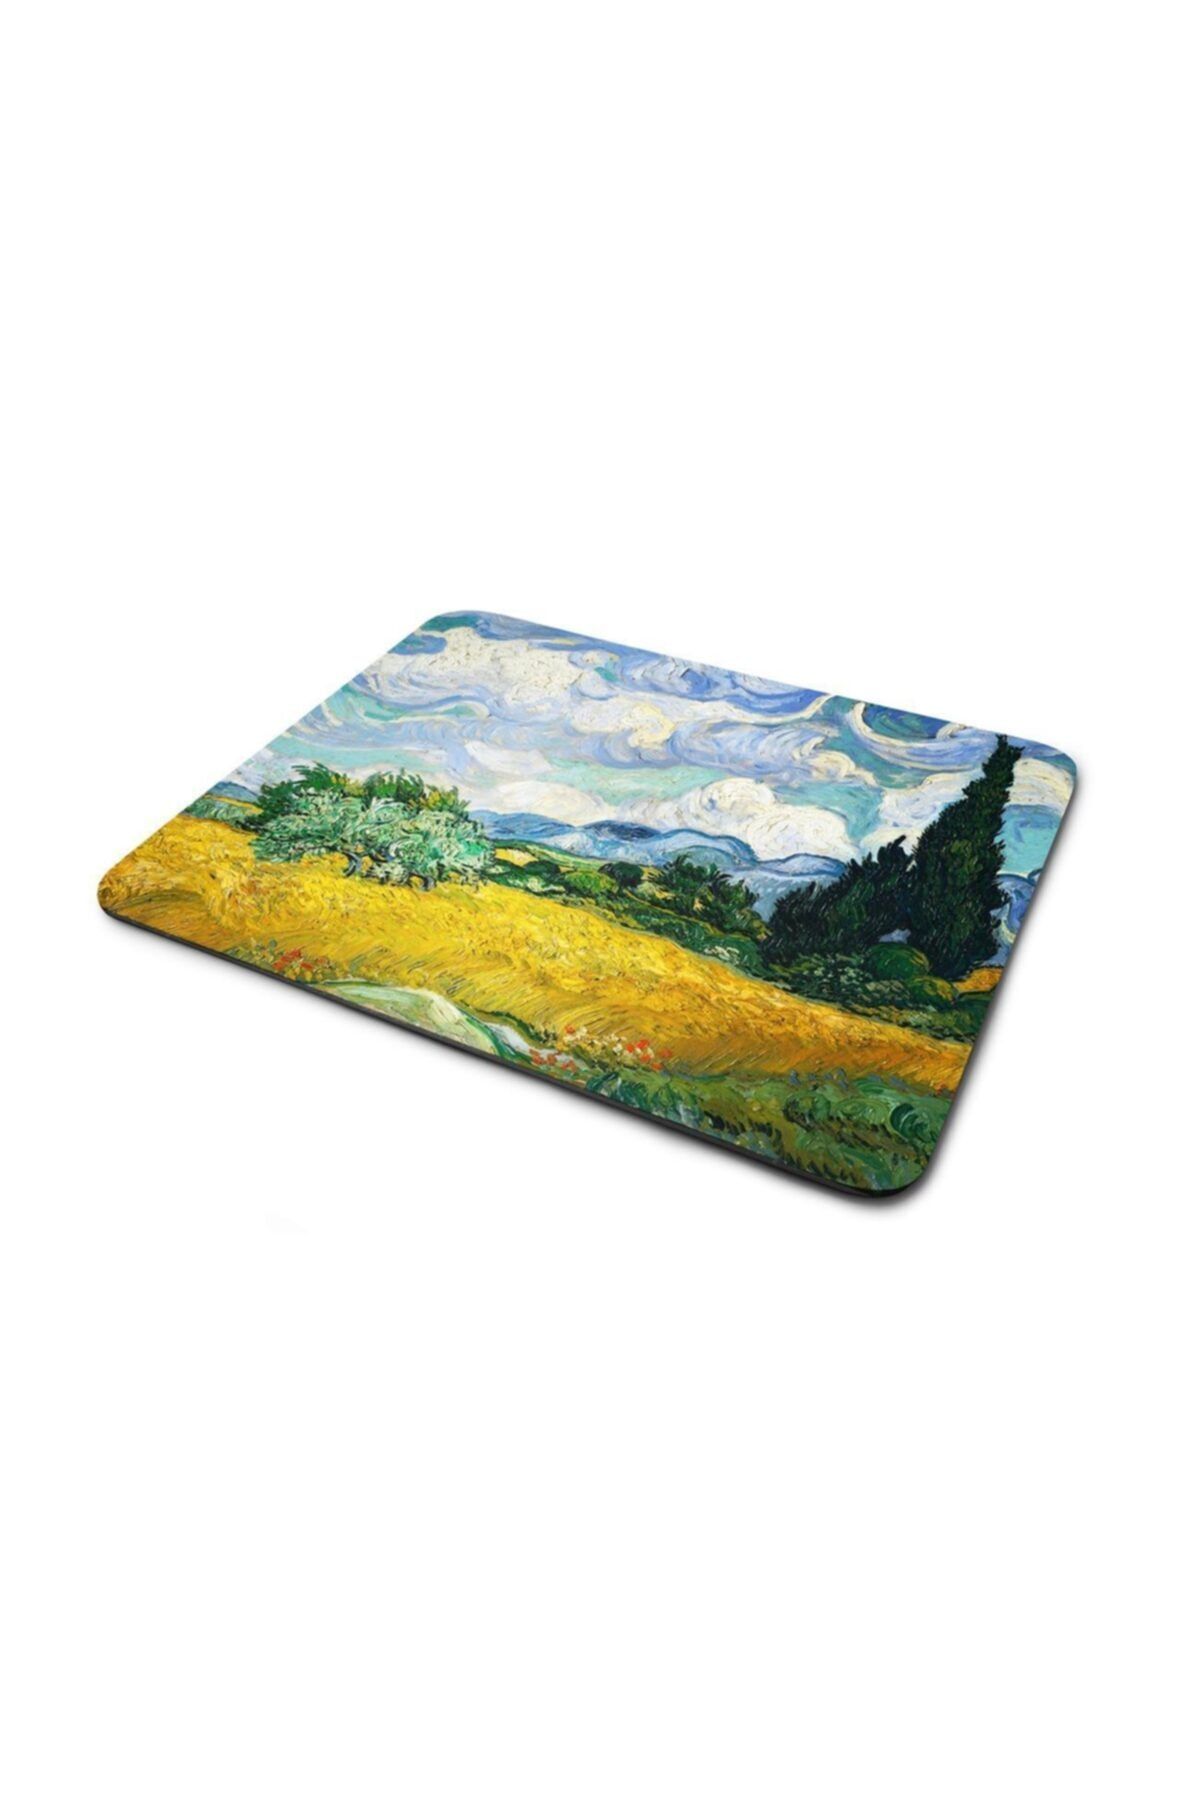 WuW Van Gogh Wheat Field With Cypresses Mouse Pad